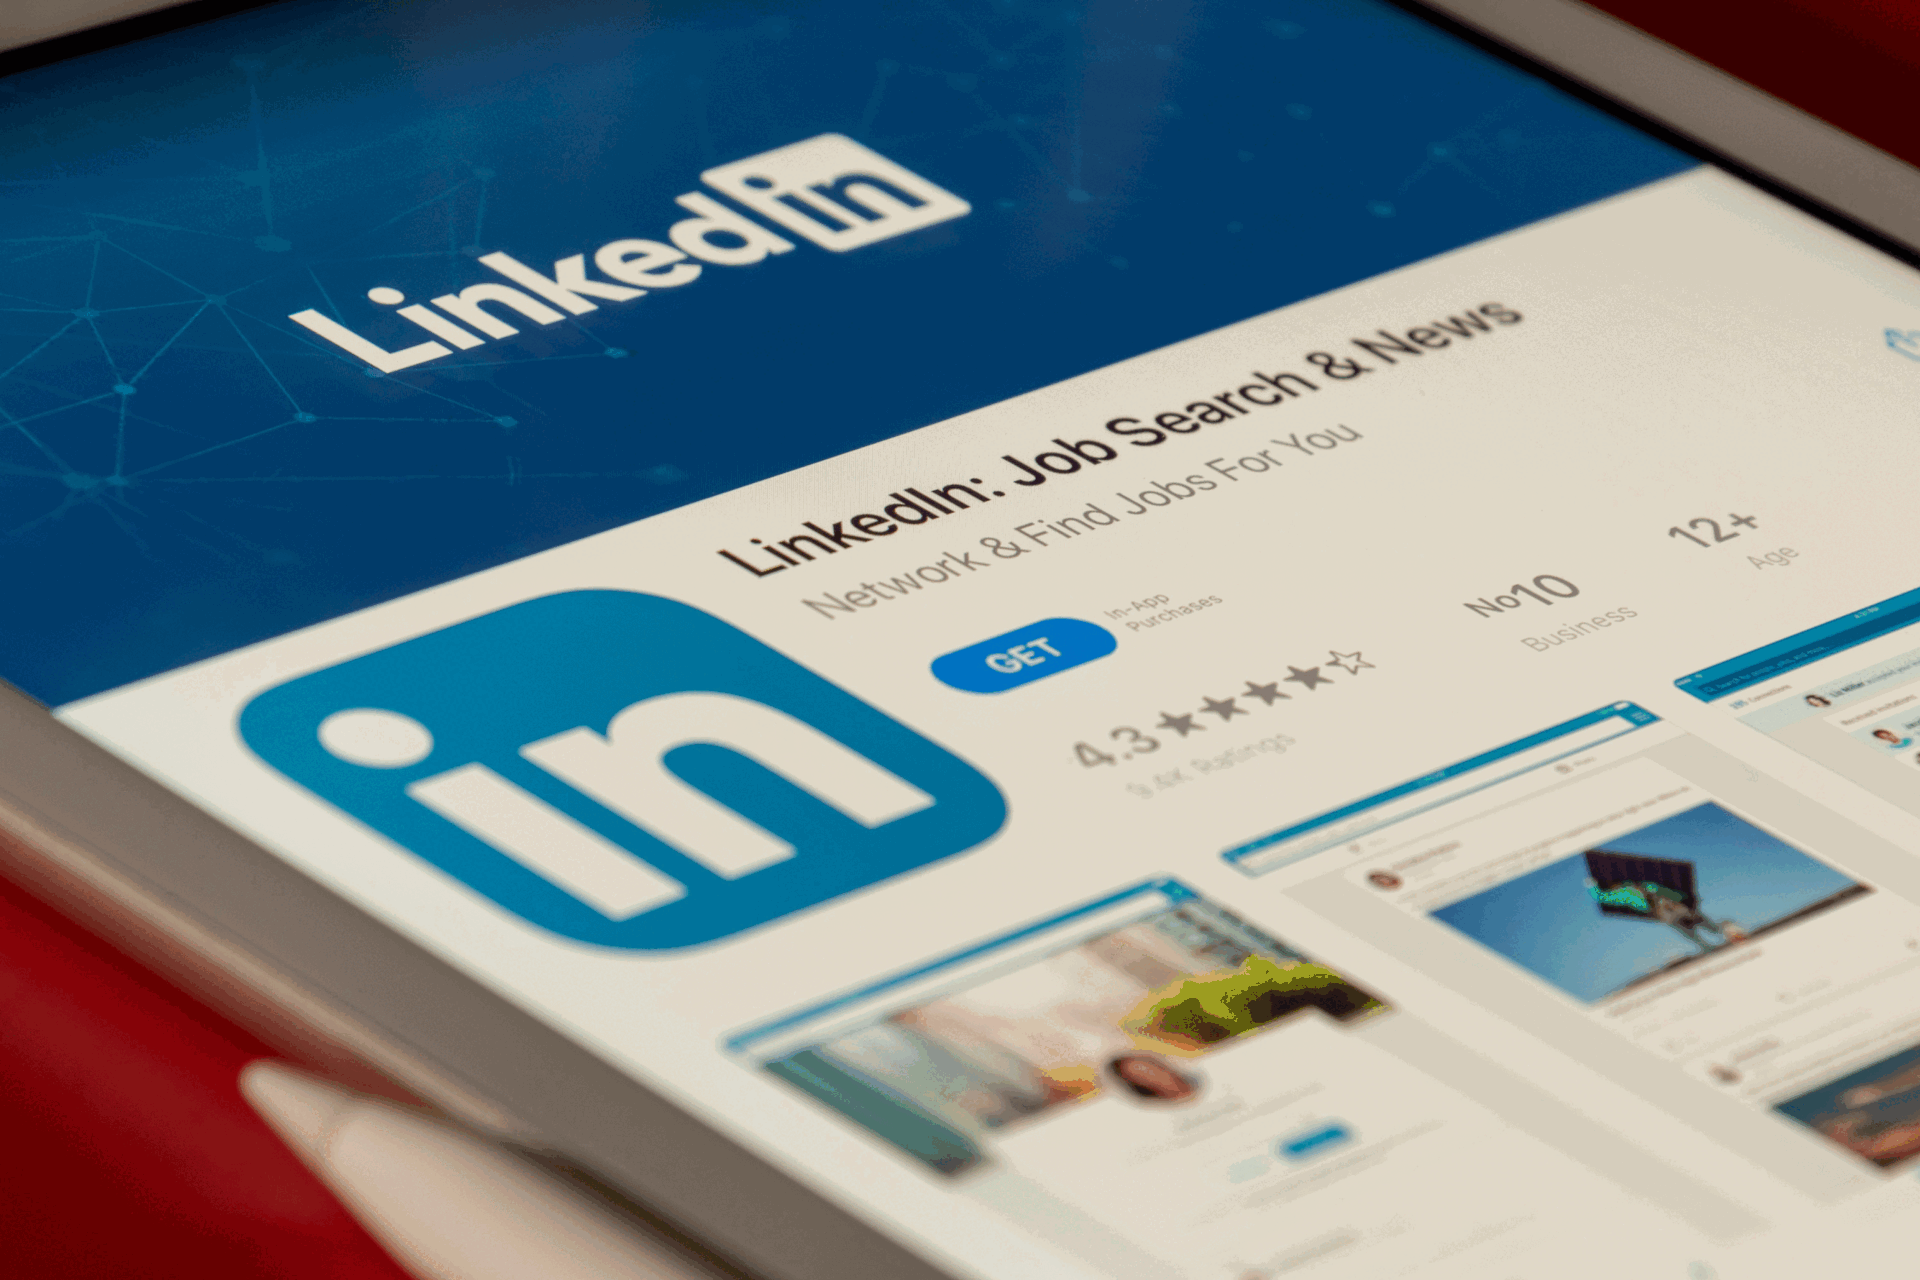 LinkedIn unveils CTV and Live Event Ads for marketers